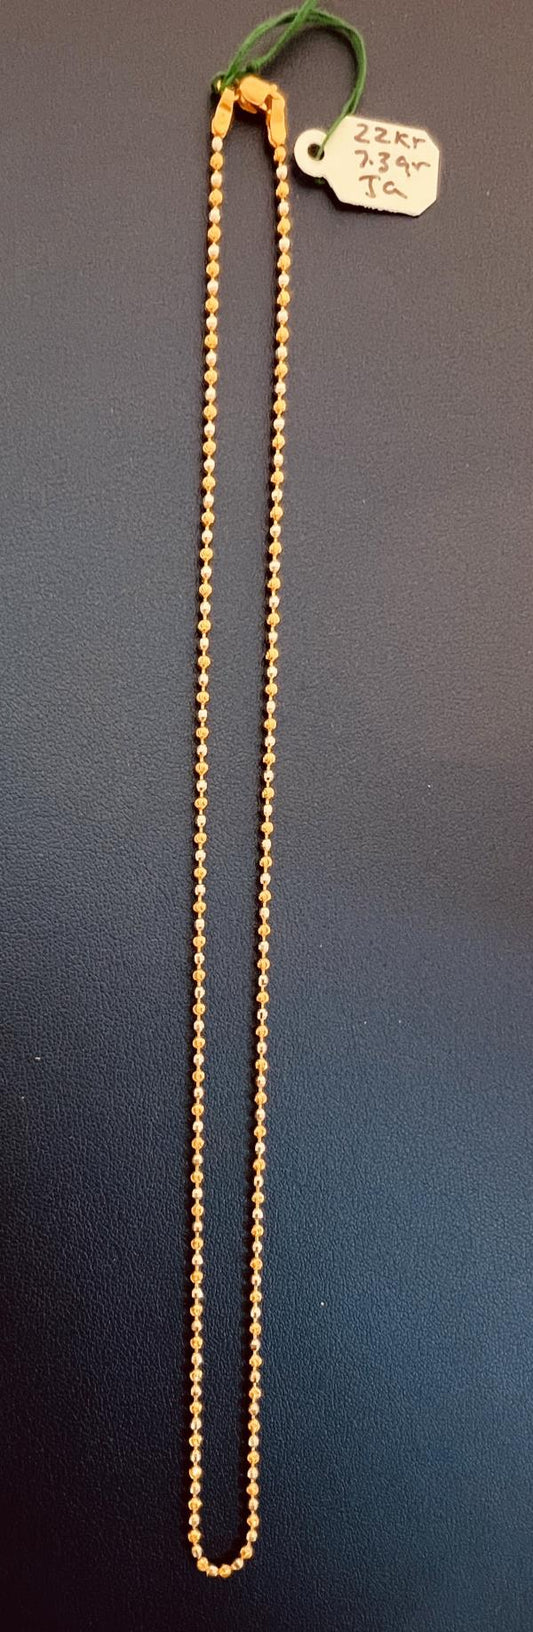 22KT GOLD CHAIN 18" TWO TONE 7.3GM